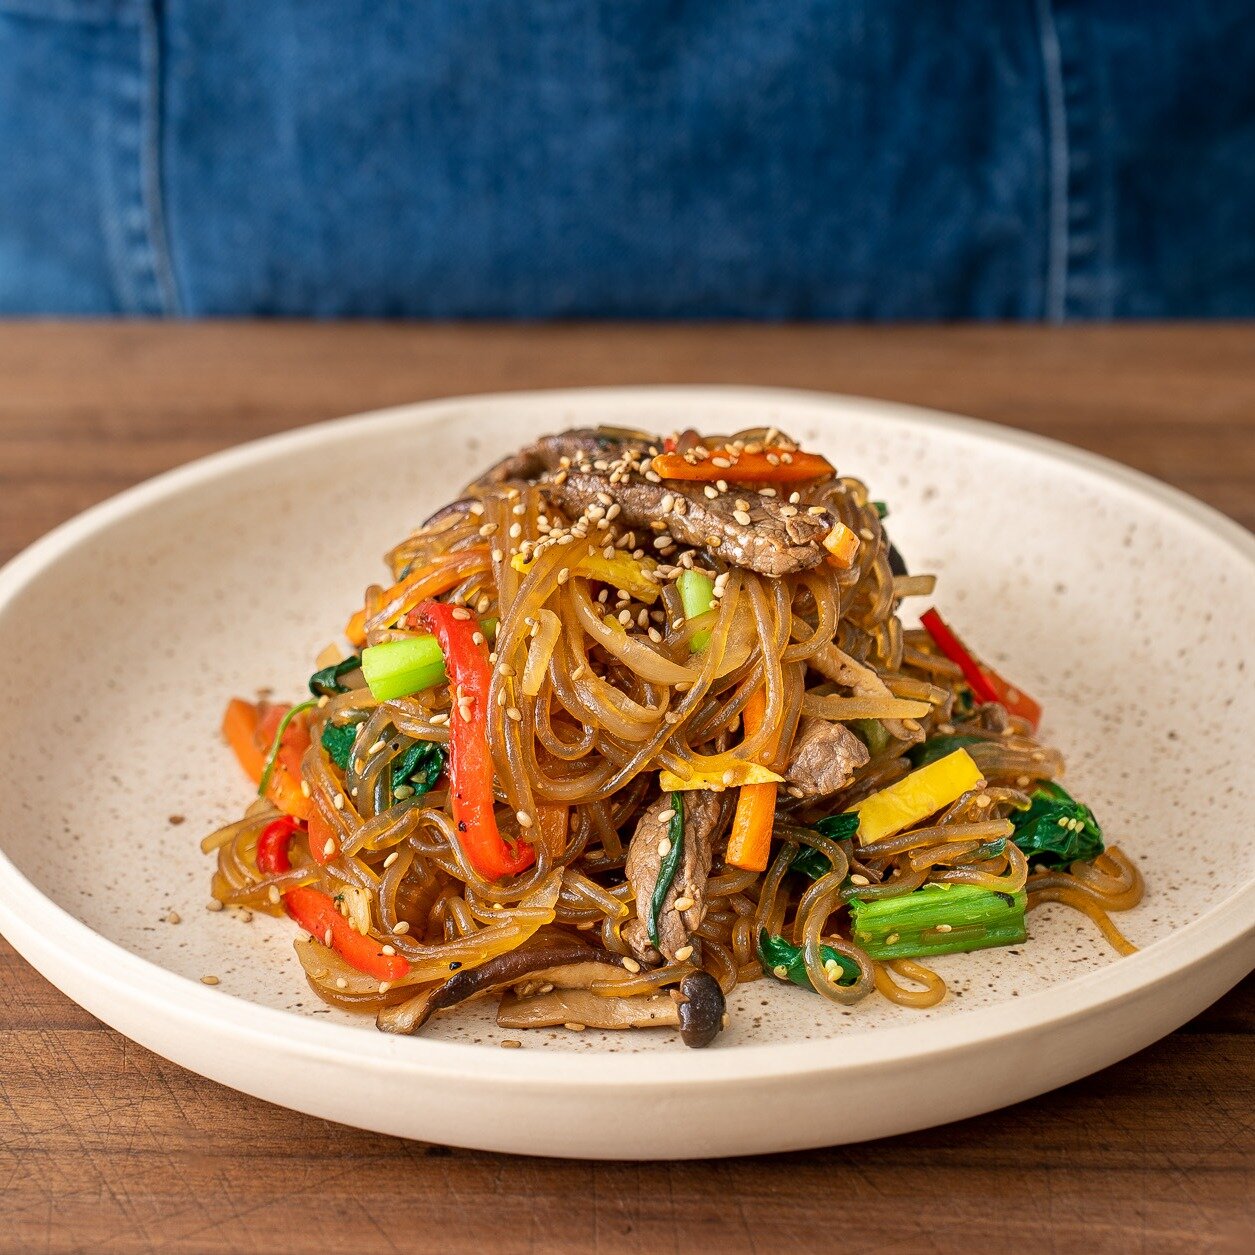 NEW video and recipe up now on YouTube for Japchae, one of my favorite Korean dishes. It's made with a mix of nicely seasoned stir fried veggies, steak (filet minion in my case), and Korean sweet potato noodles that have a fun, bouncy texture and tas